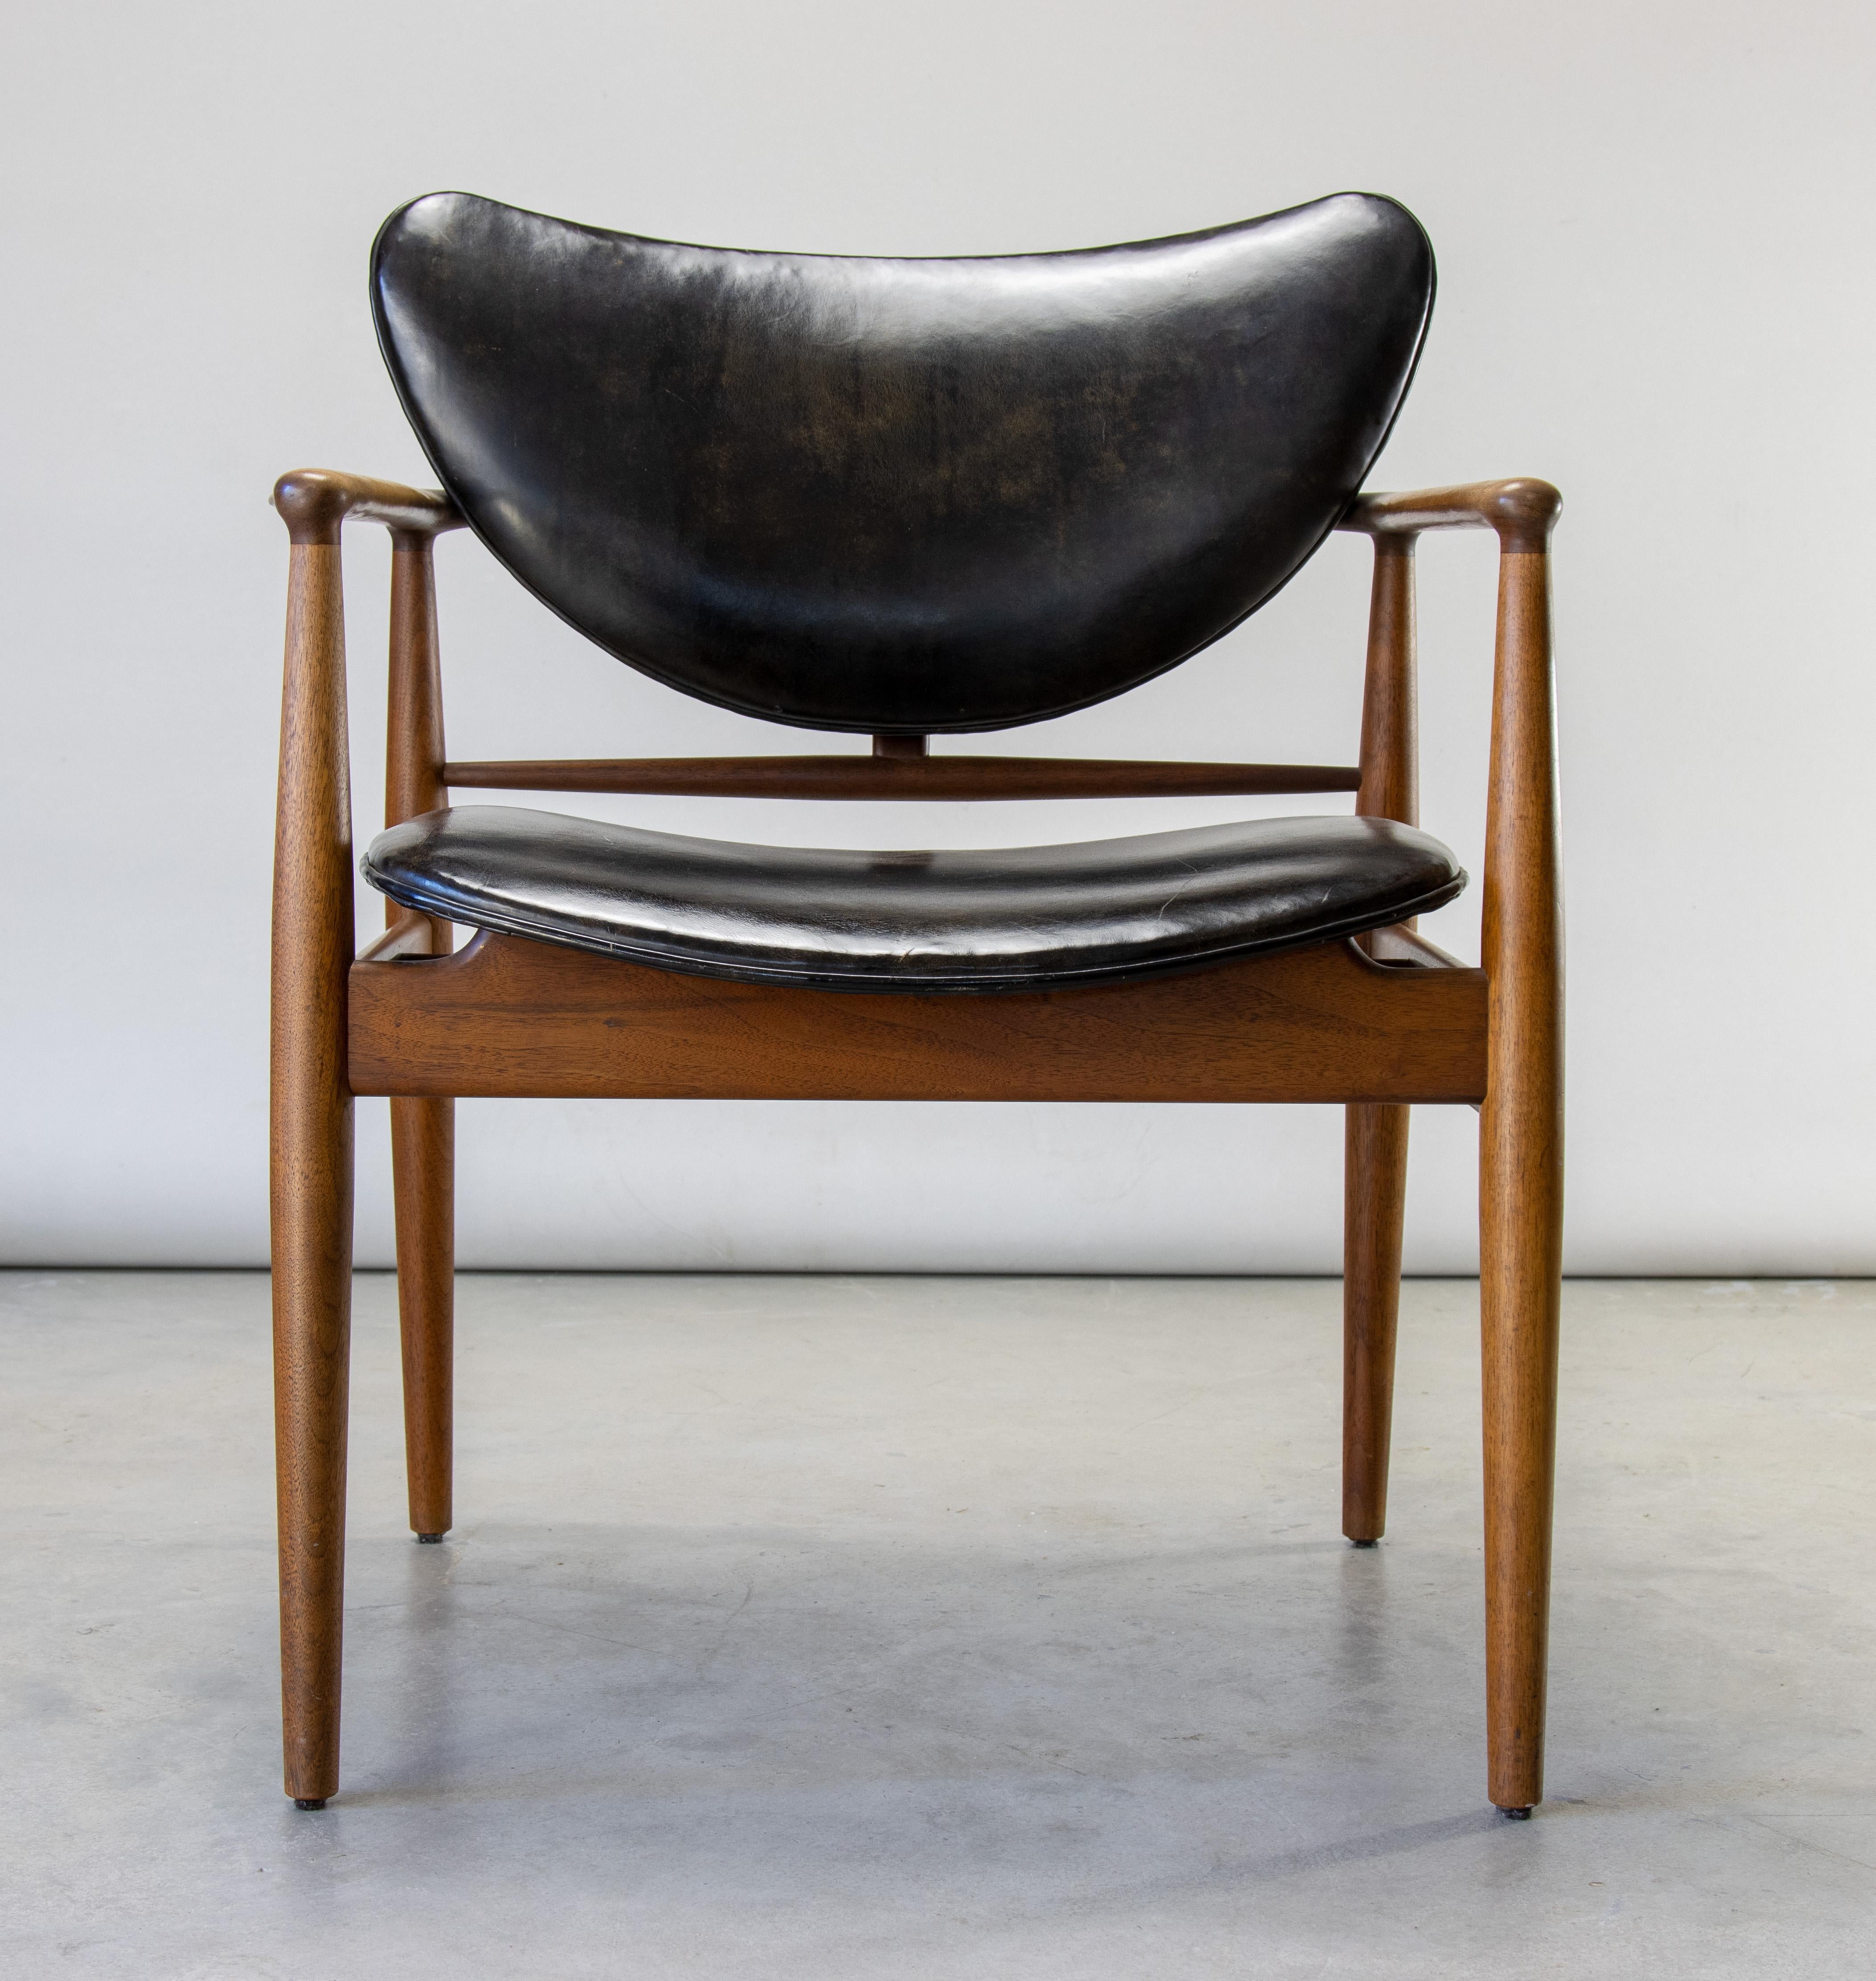 The no. 48 armchair designed by Finn Juhl, produced by Baker in the 1950s. This example showing a gorgeous patina to the leather. No cuts or tears. Nice warm patina to the highly figured walnut. Brass spacers float the back from the walnut frame and